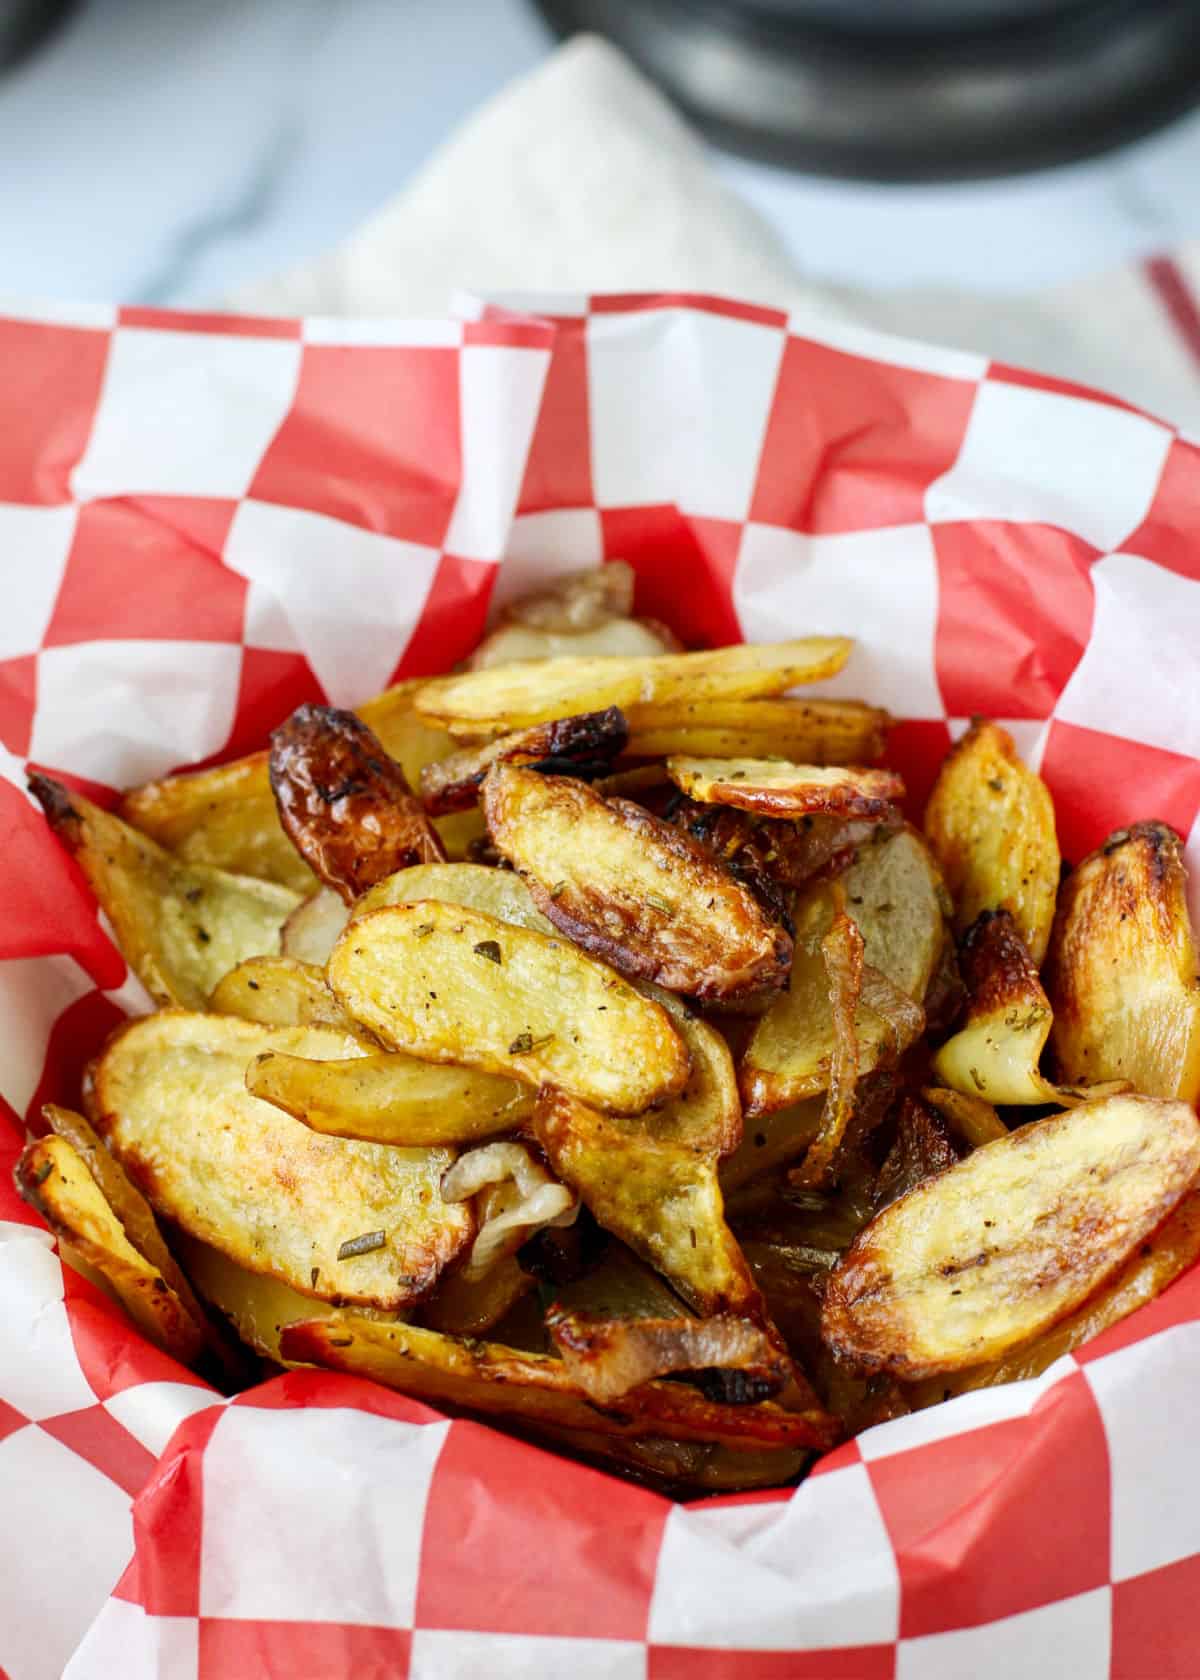 Roasted Fingerling Potatoes with Shallots and Rosemary in a red checkered paper lined bowl.